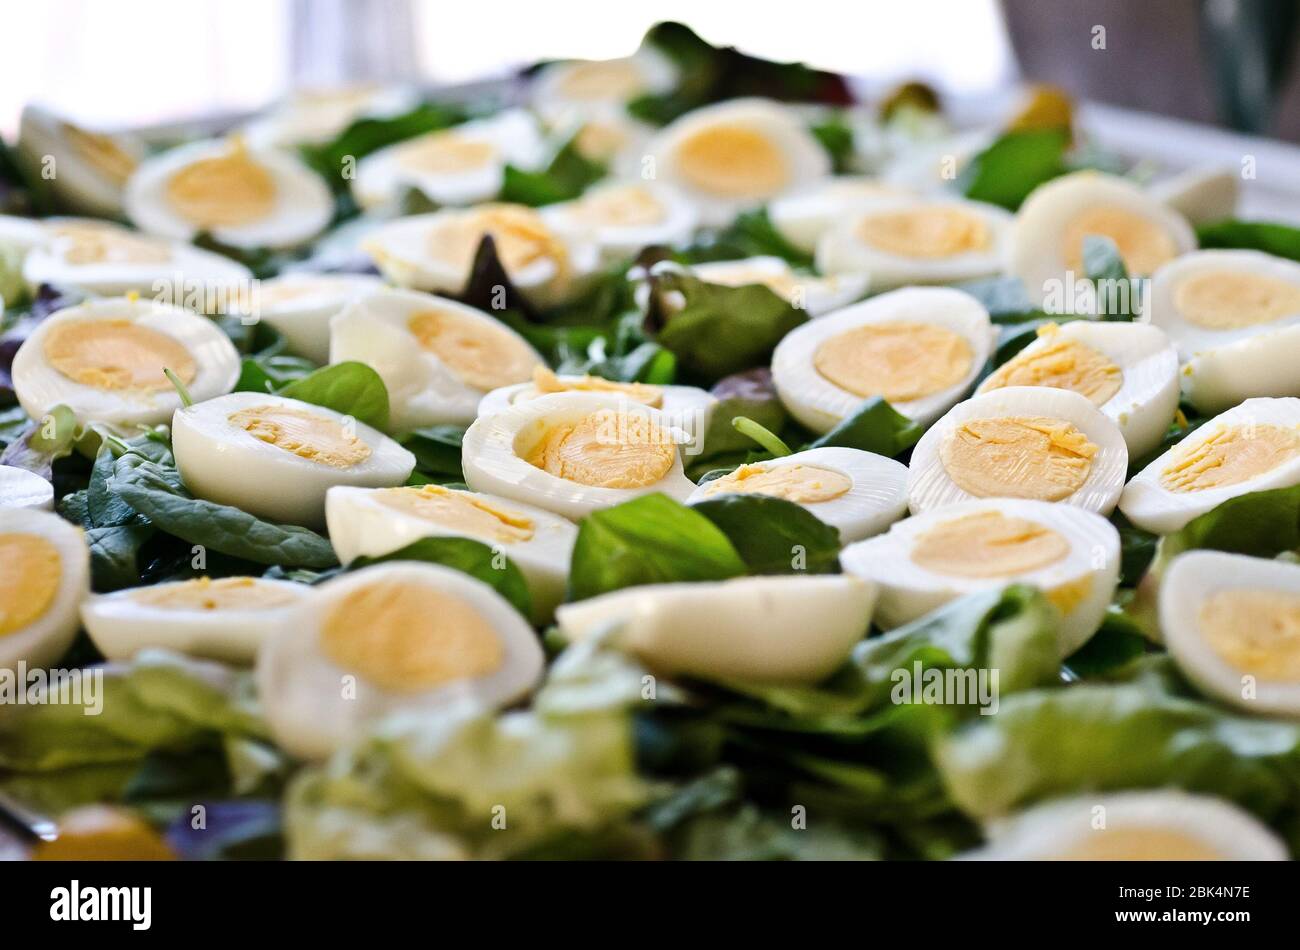 Hard boiled eggs and lettuce beautifully presented on a tray Stock Photo